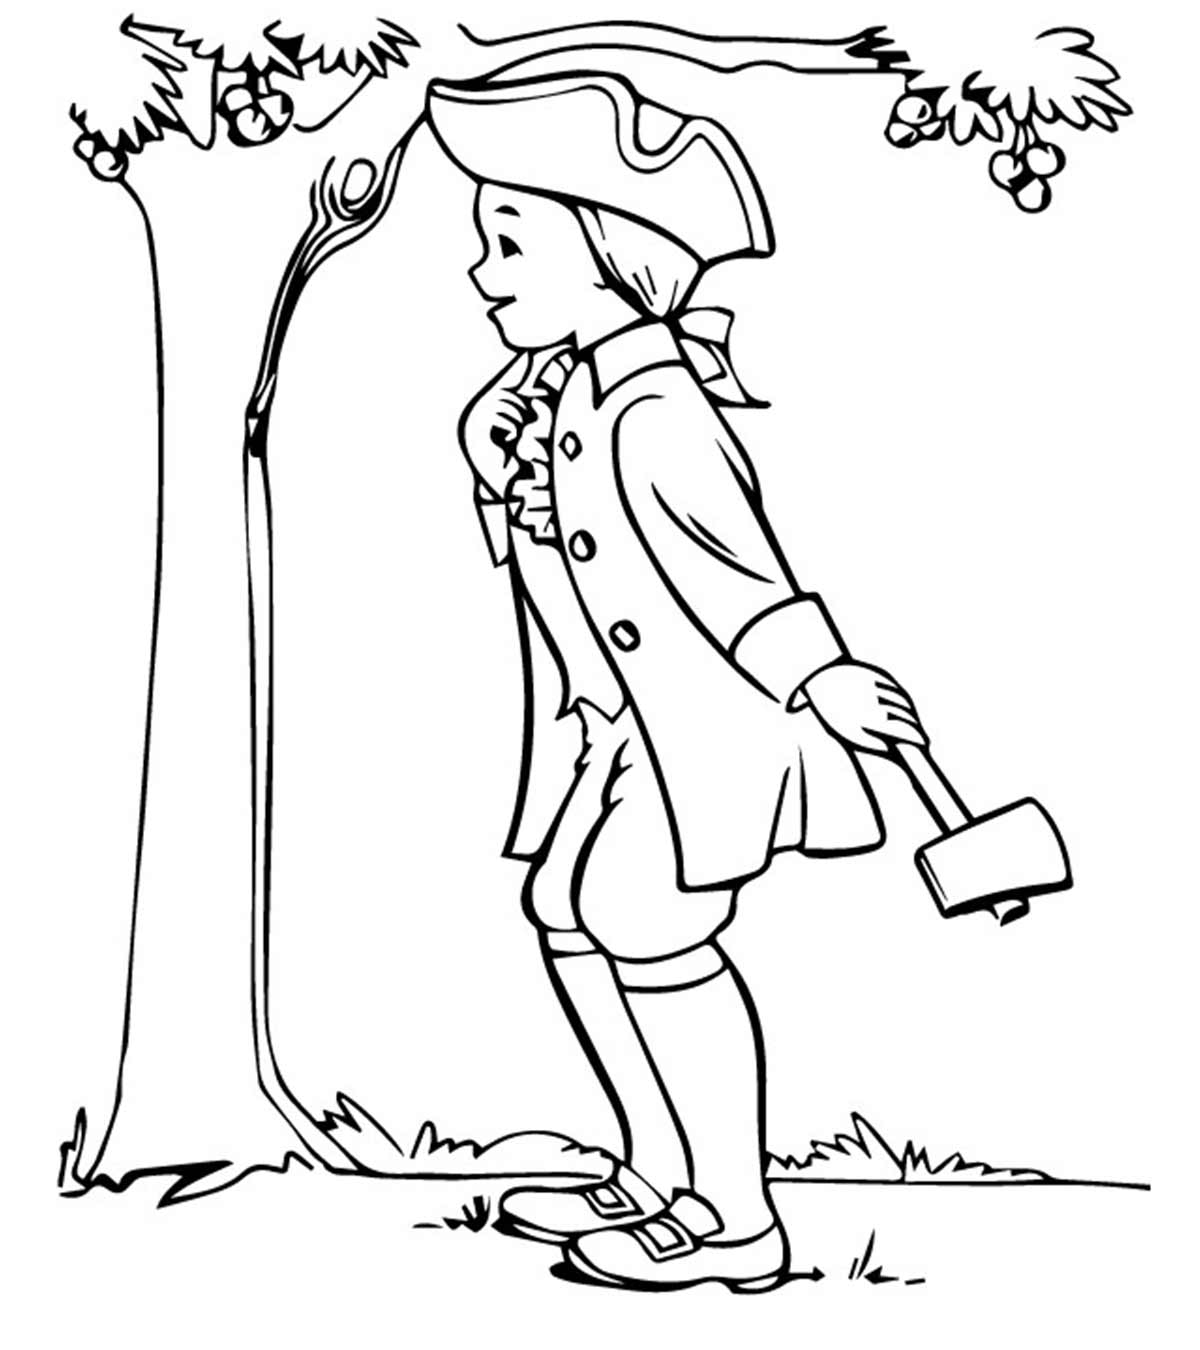 10 Best George Washington Coloring Pages For Toddlers